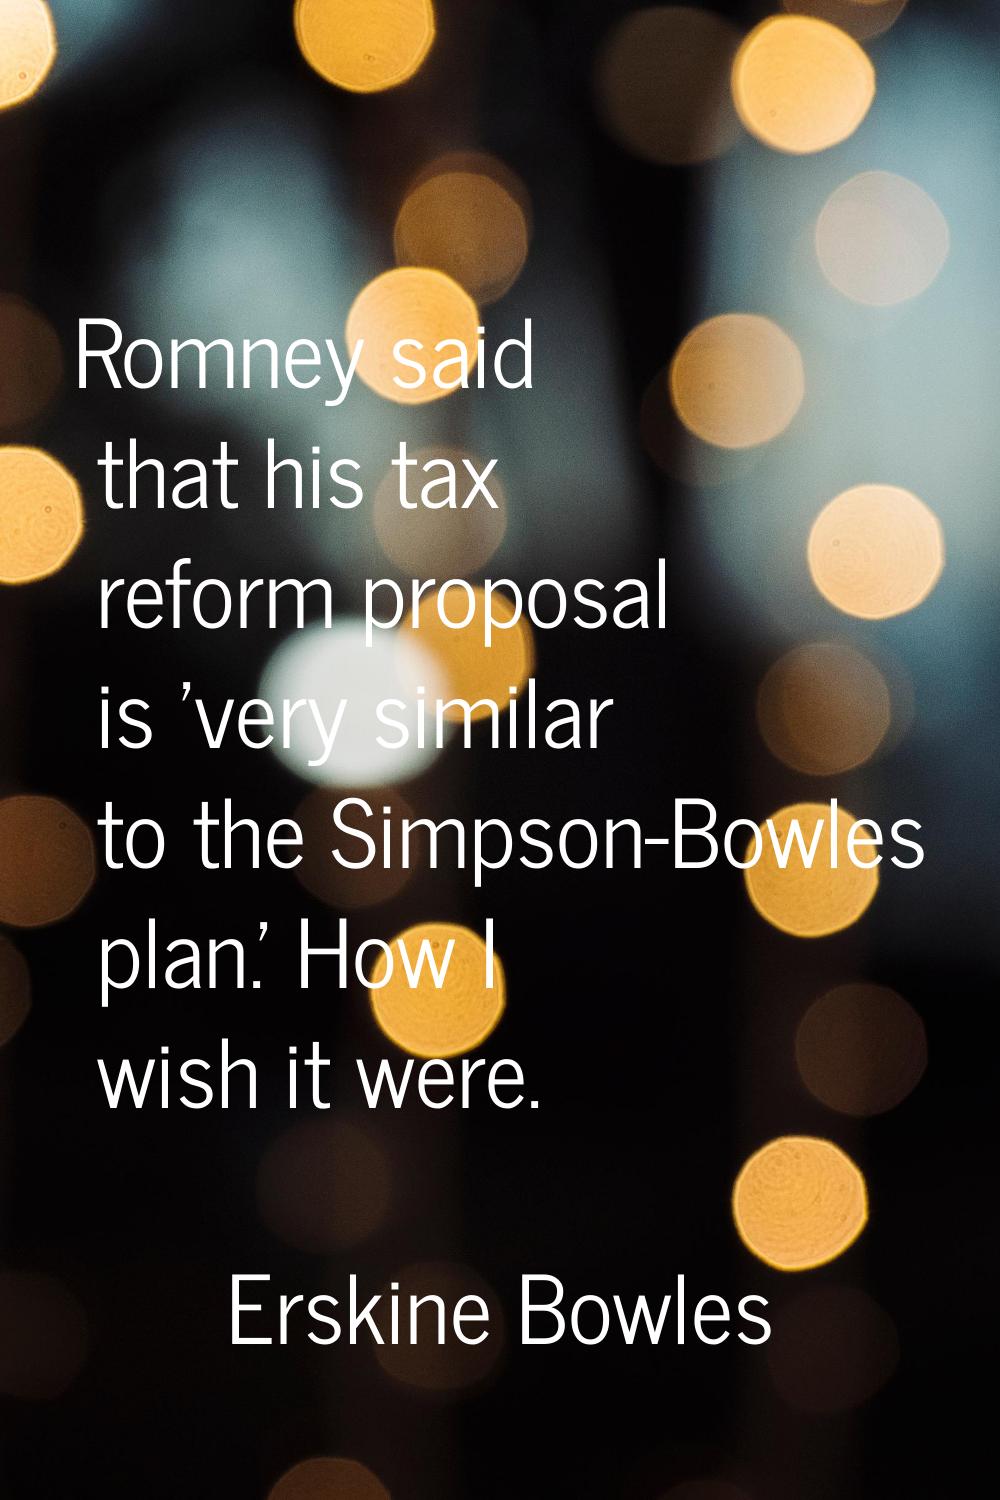 Romney said that his tax reform proposal is 'very similar to the Simpson-Bowles plan.' How I wish i